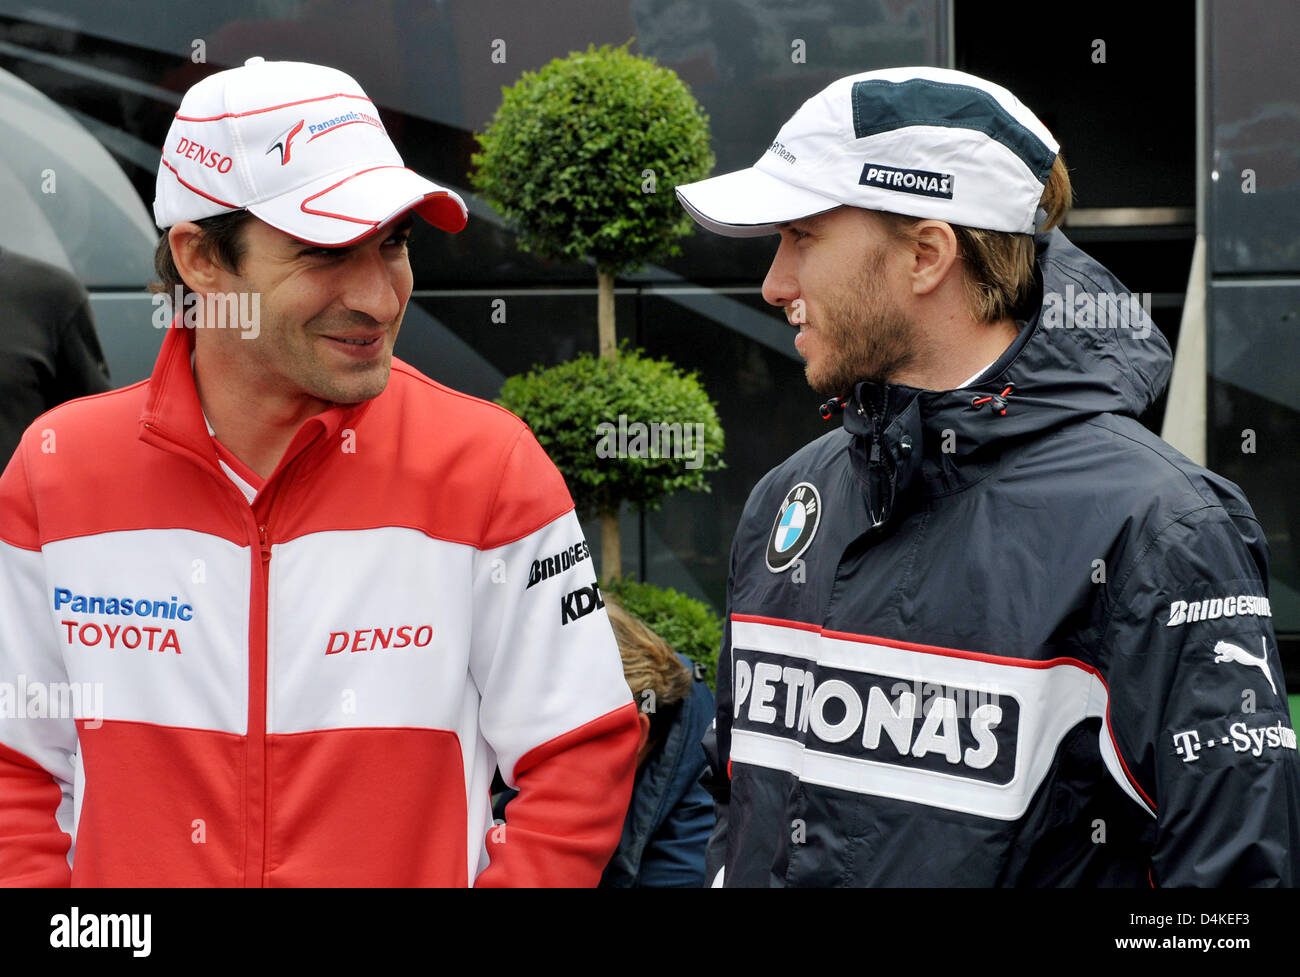 German Formula One driver Nick Heidfeld (R) of BMW Sauber and German Formula One driver Timo Glock (L) of Toyota Racing chat in the paddock prior to the Grand Prix of Germany at the Nuerburgring in Nuerburg, Germany, 12 July 2009. Photo: Carmen Jaspersen Stock Photo